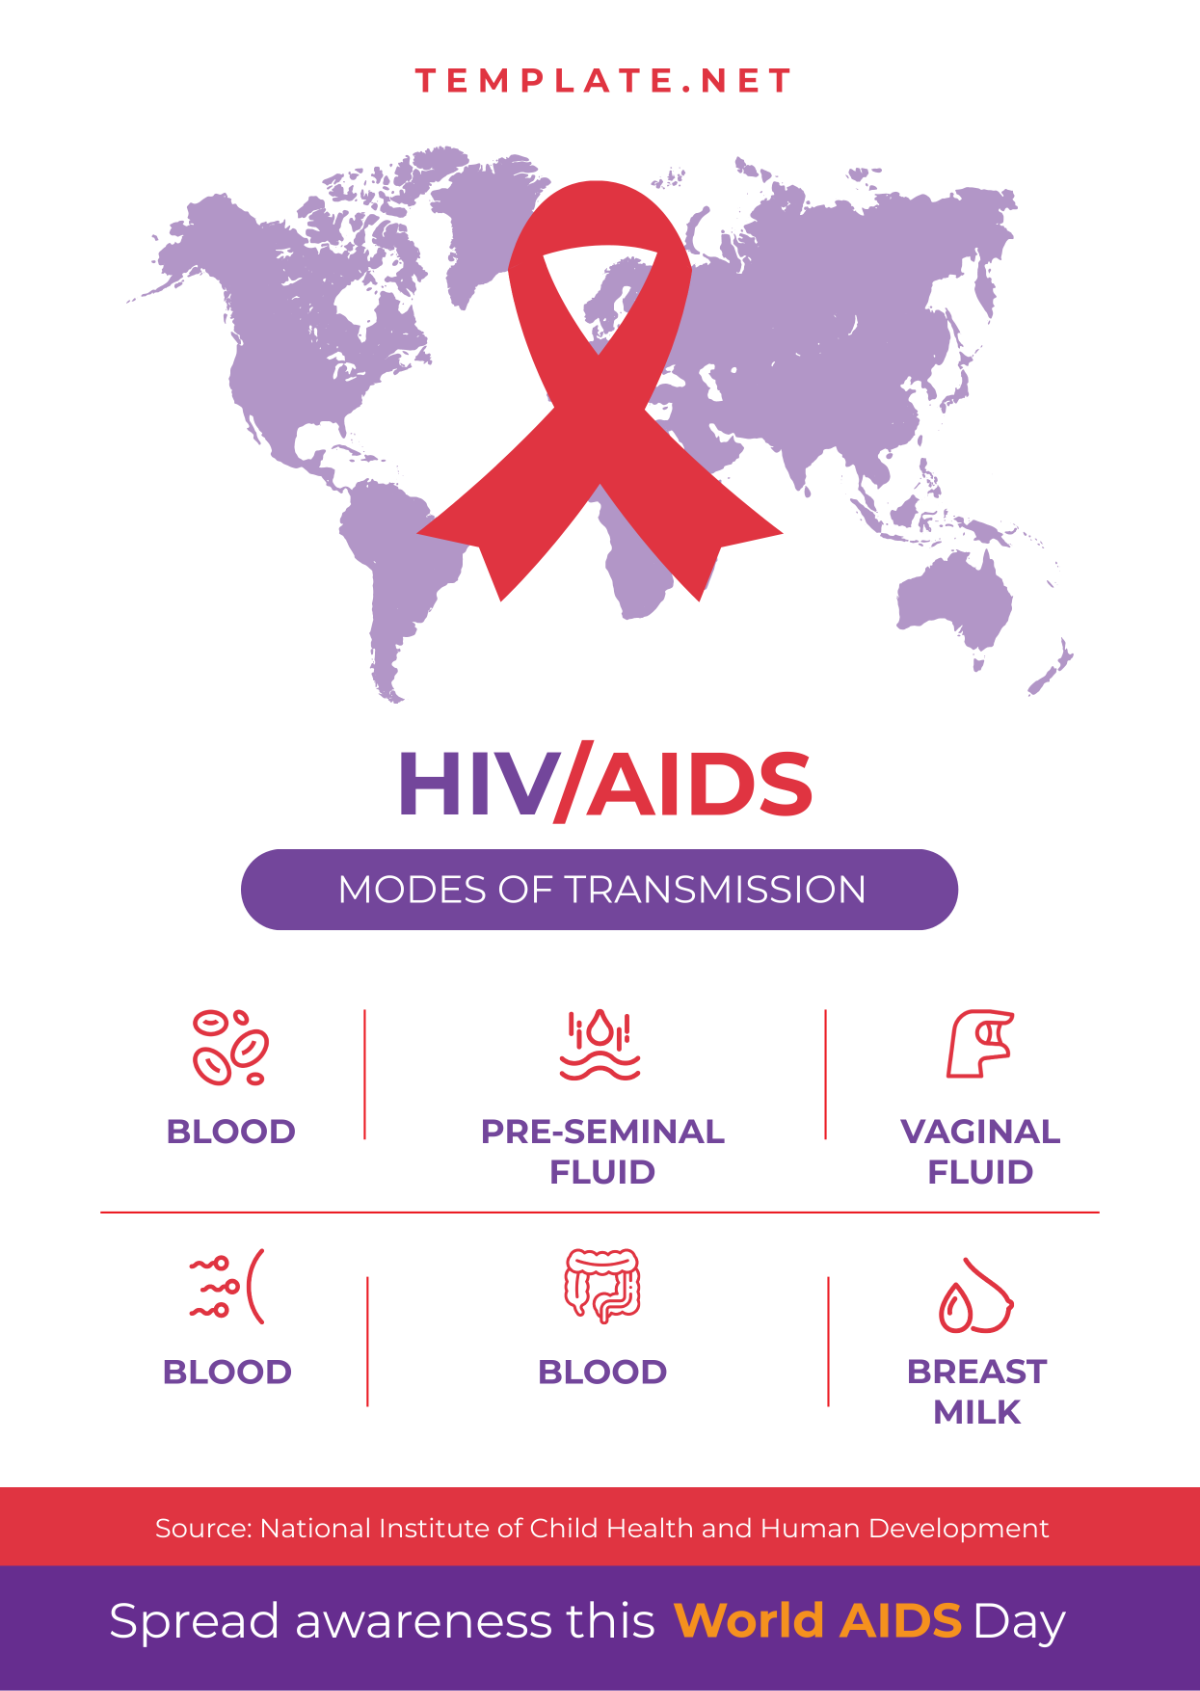 FREE World AIDS Day Templates & Examples - Edit Online & Download